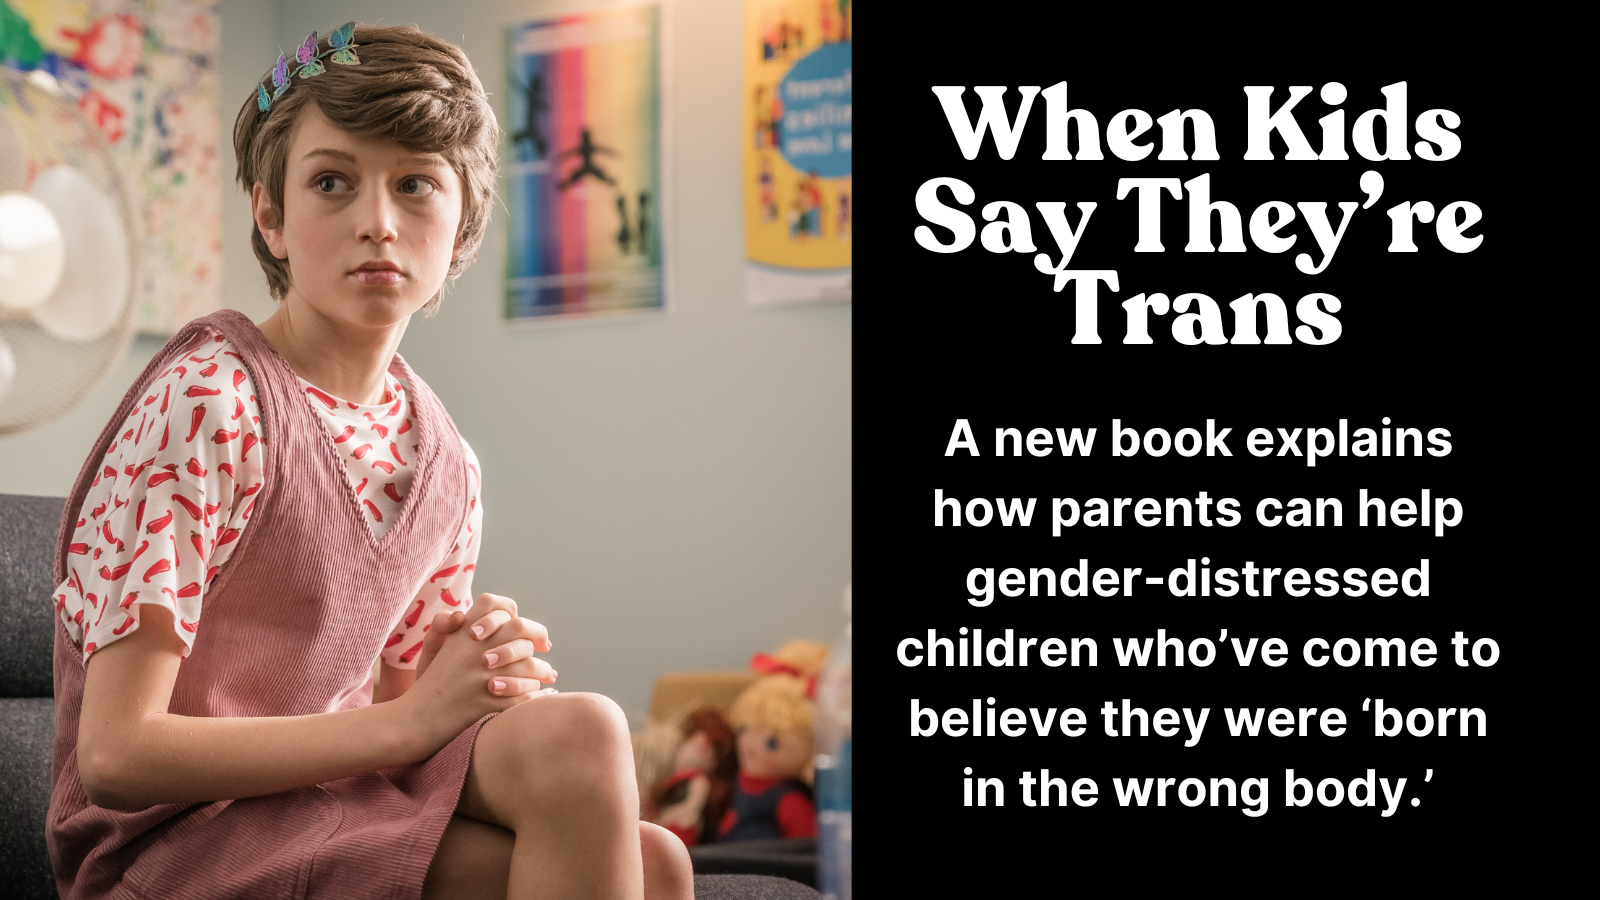 It's dangerous and wrong to tell all children they're 'gender